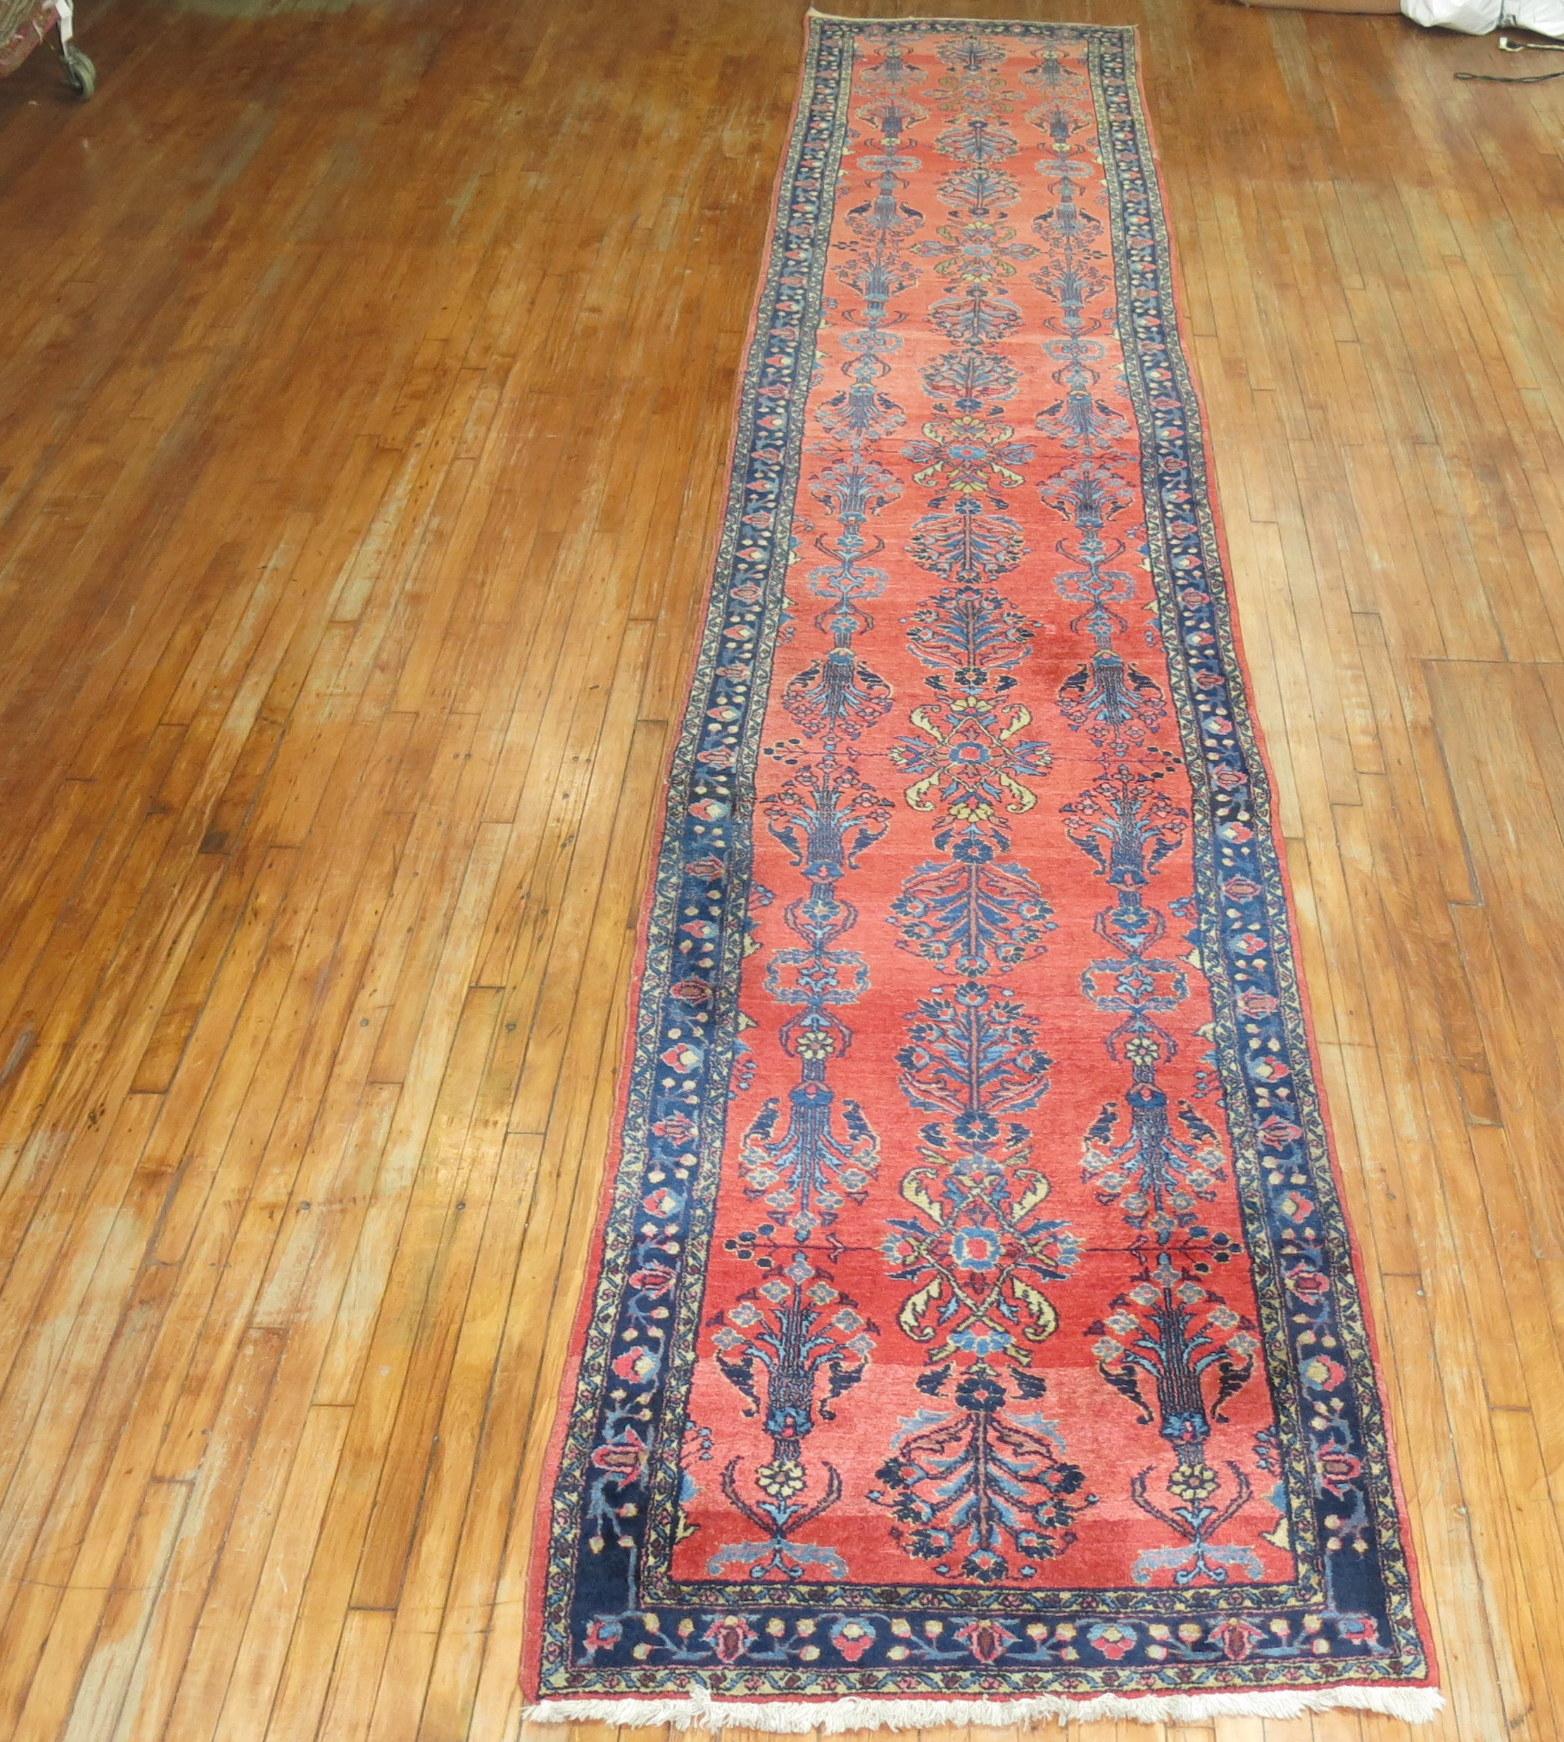 A mid-20th-century rare wide long size Persian Sarouk runner. Full even pile condition

Measures: 3'7” x 20'.